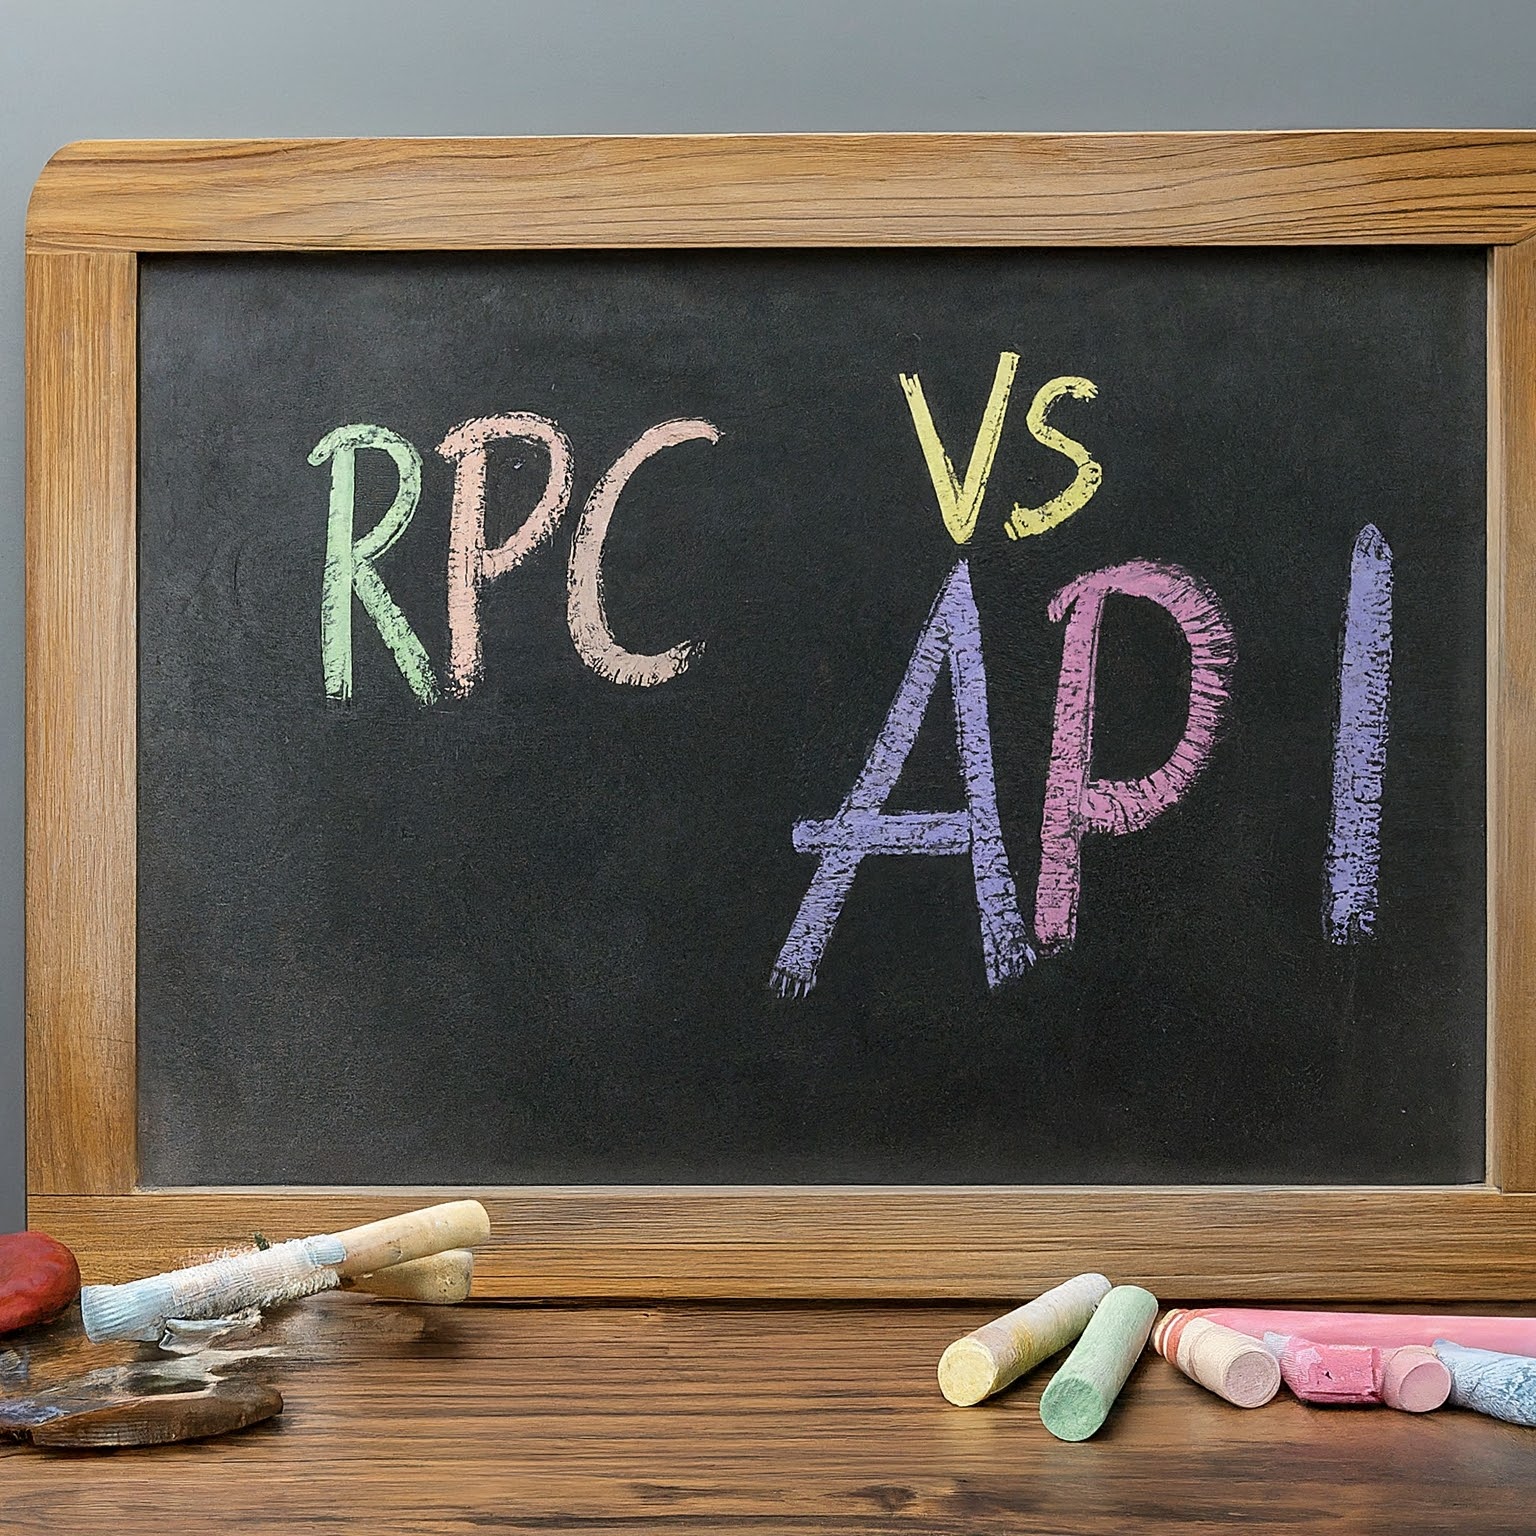 What Are the Differences Between RPC and API?